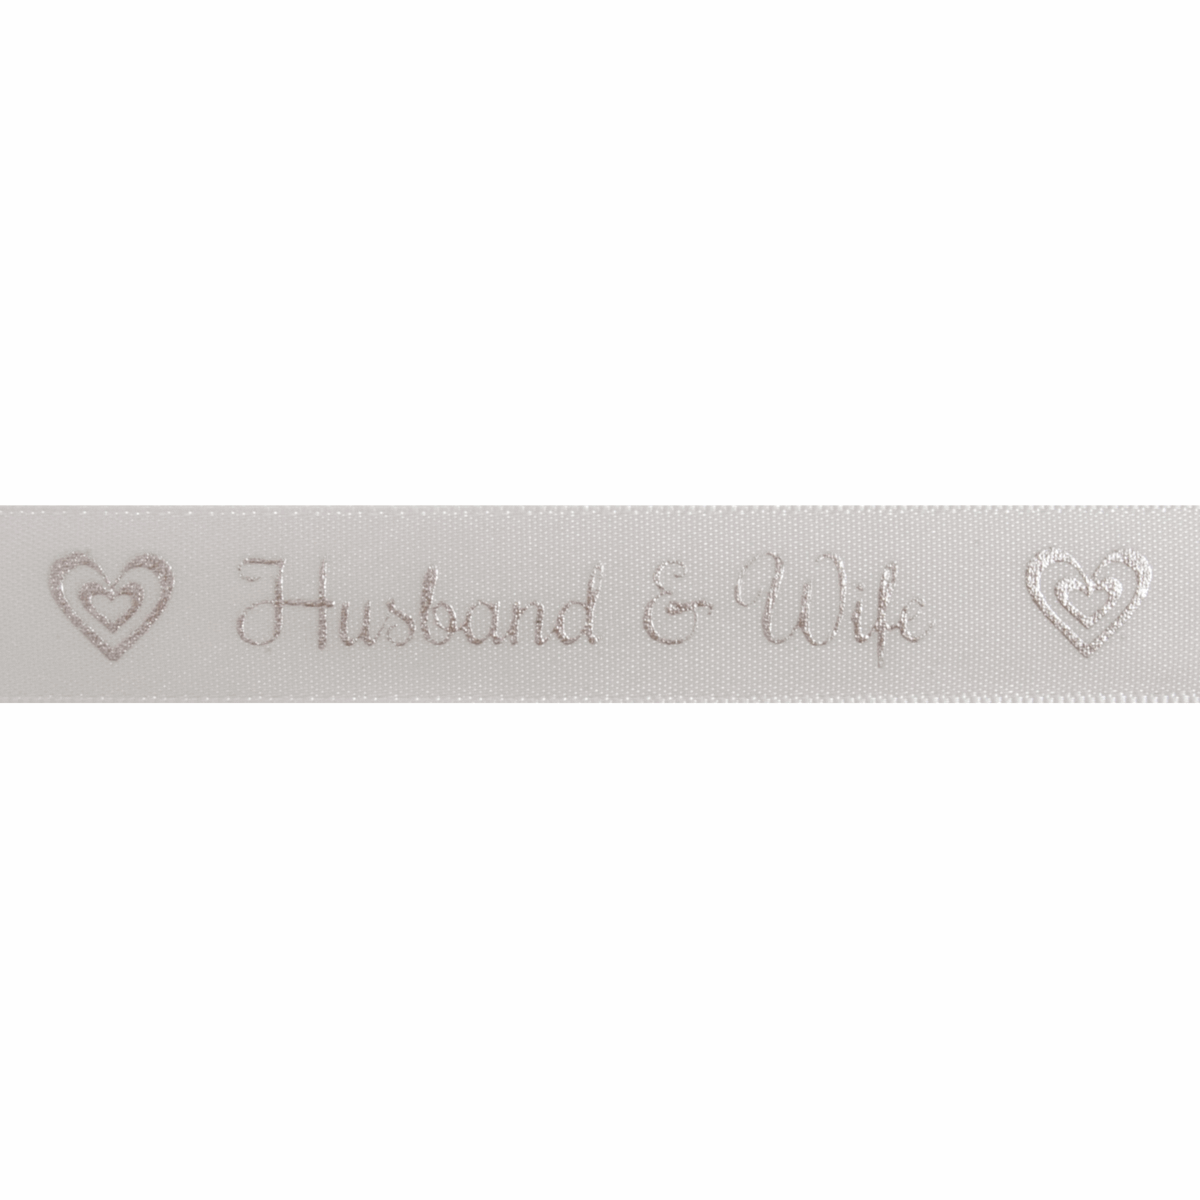 Bowtique Silver Husband and Wife Satin Ribbon - 5m x 15mm Roll